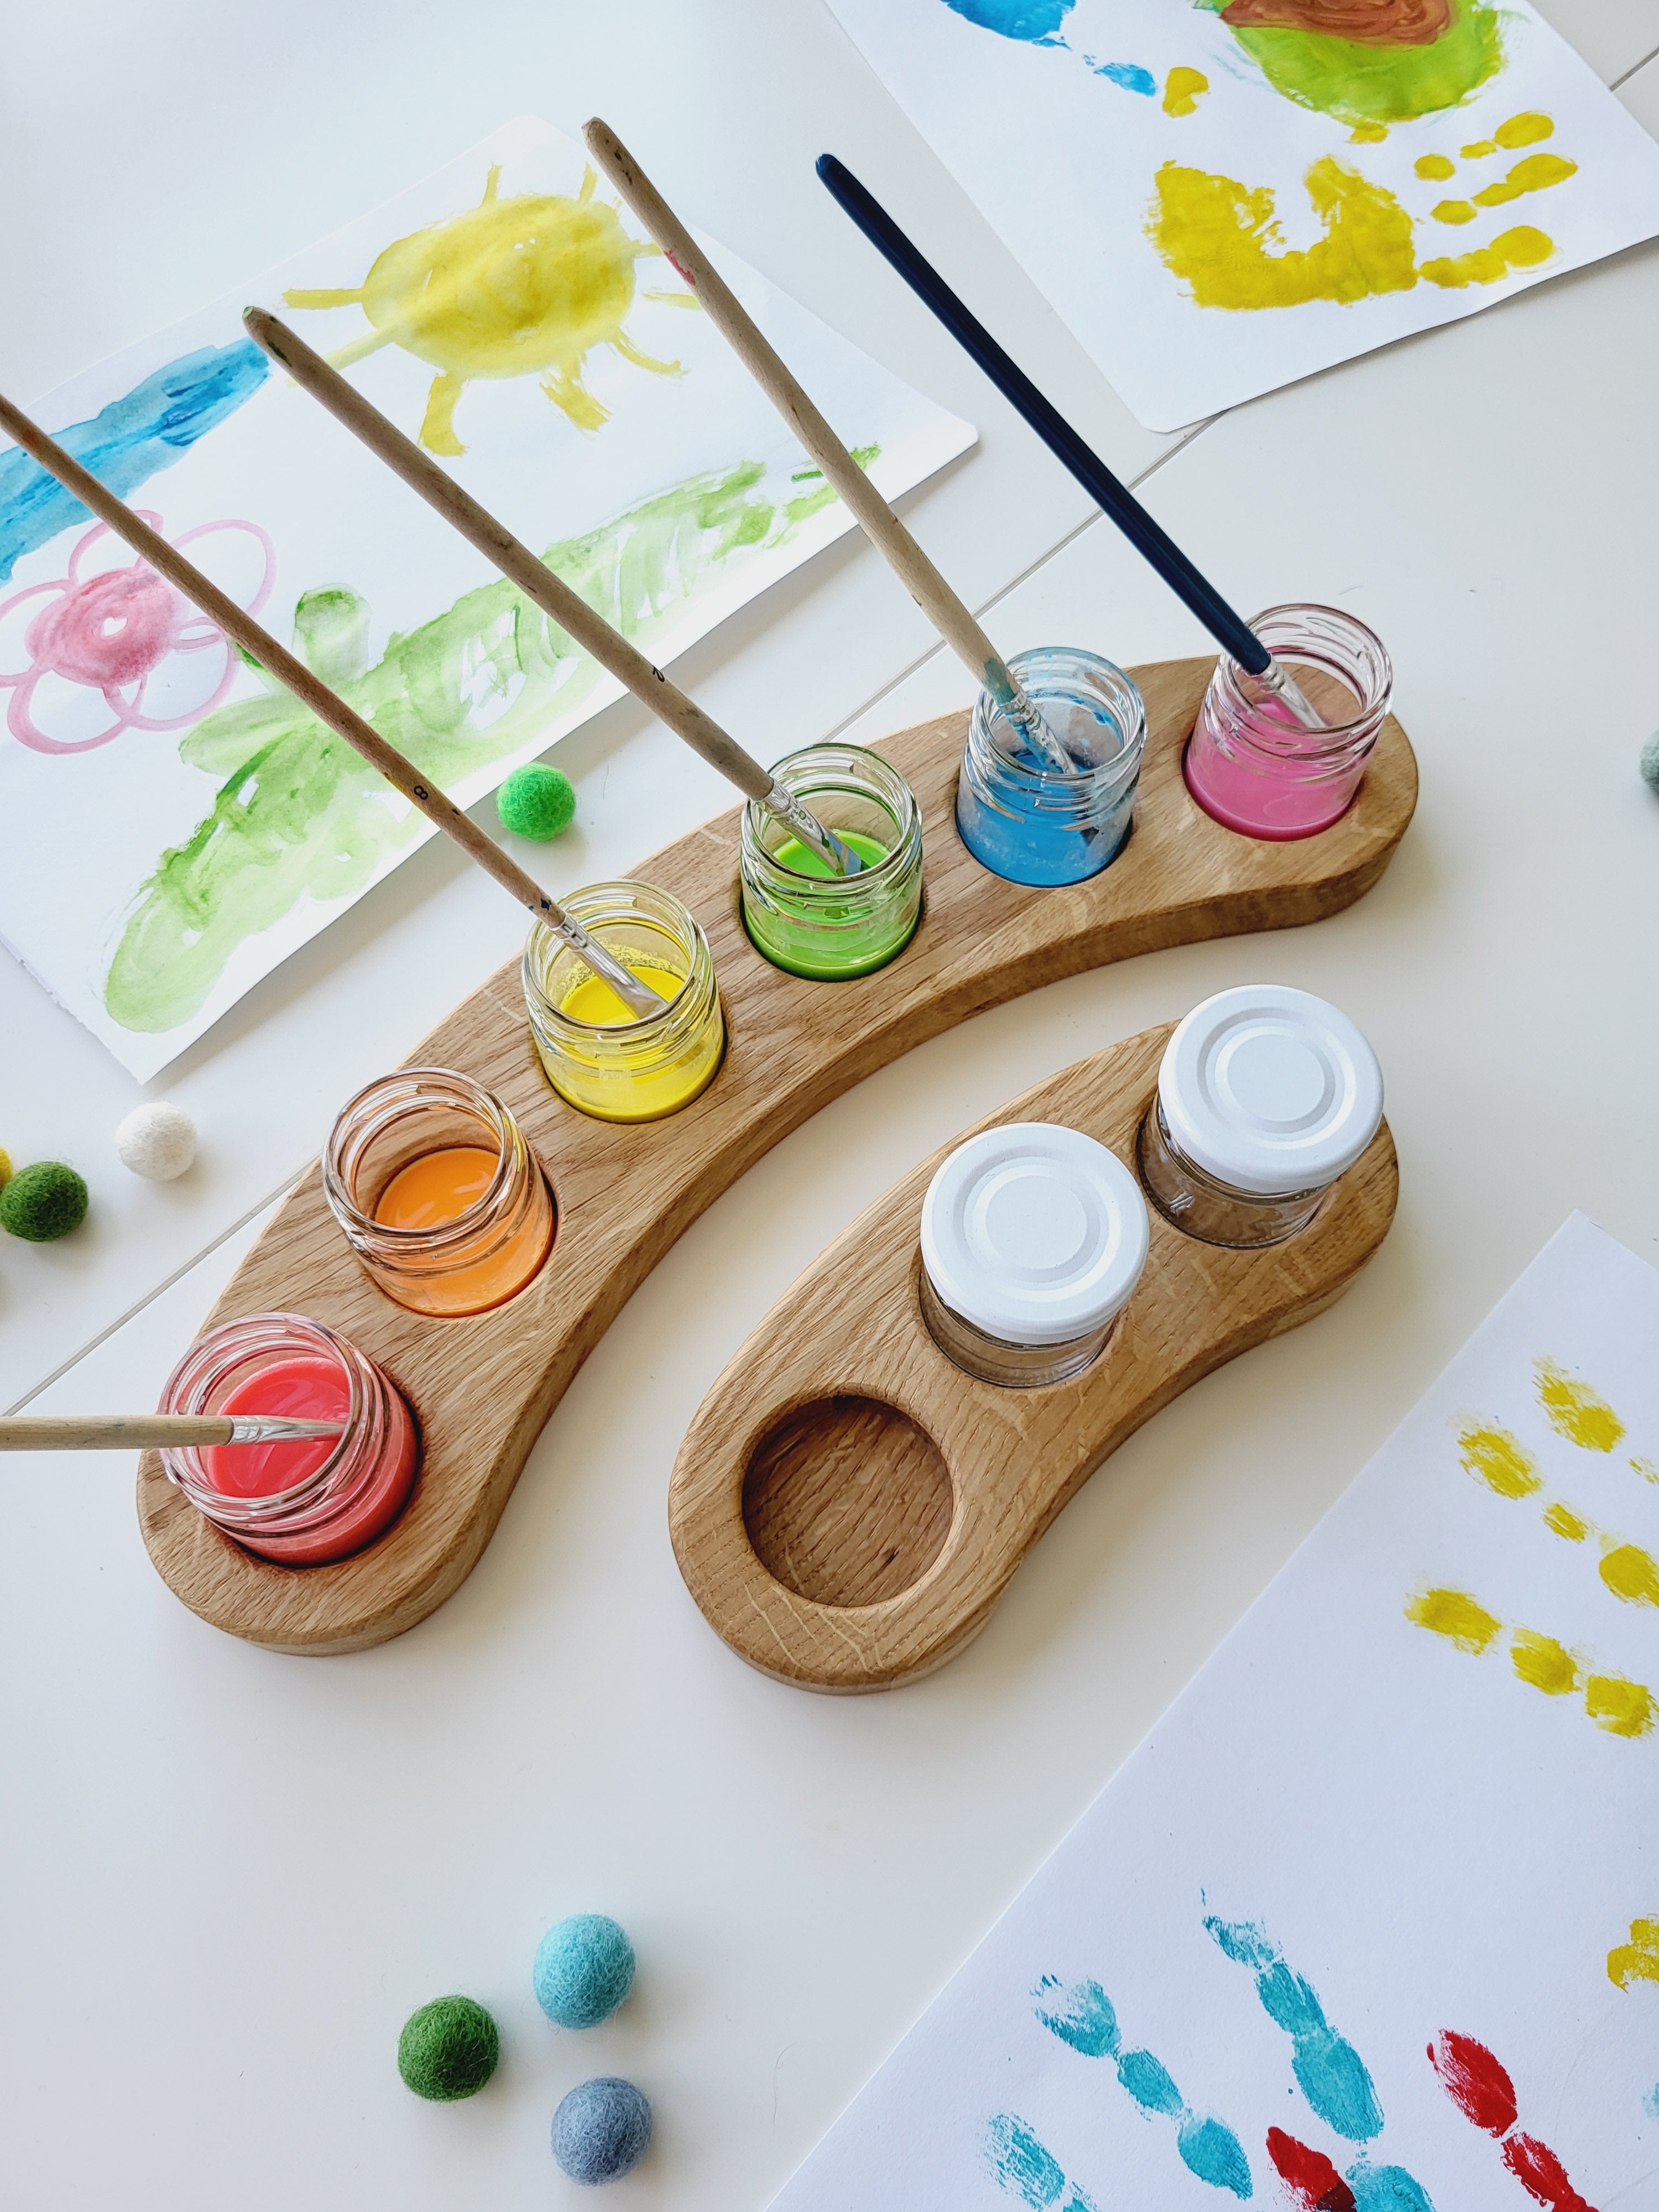 Paint jar holder ark shape for 3 or 6 jars, brush holder, watercolor painting, sorting tray, watercolor tray, pencil holder (Copy) (Copy)